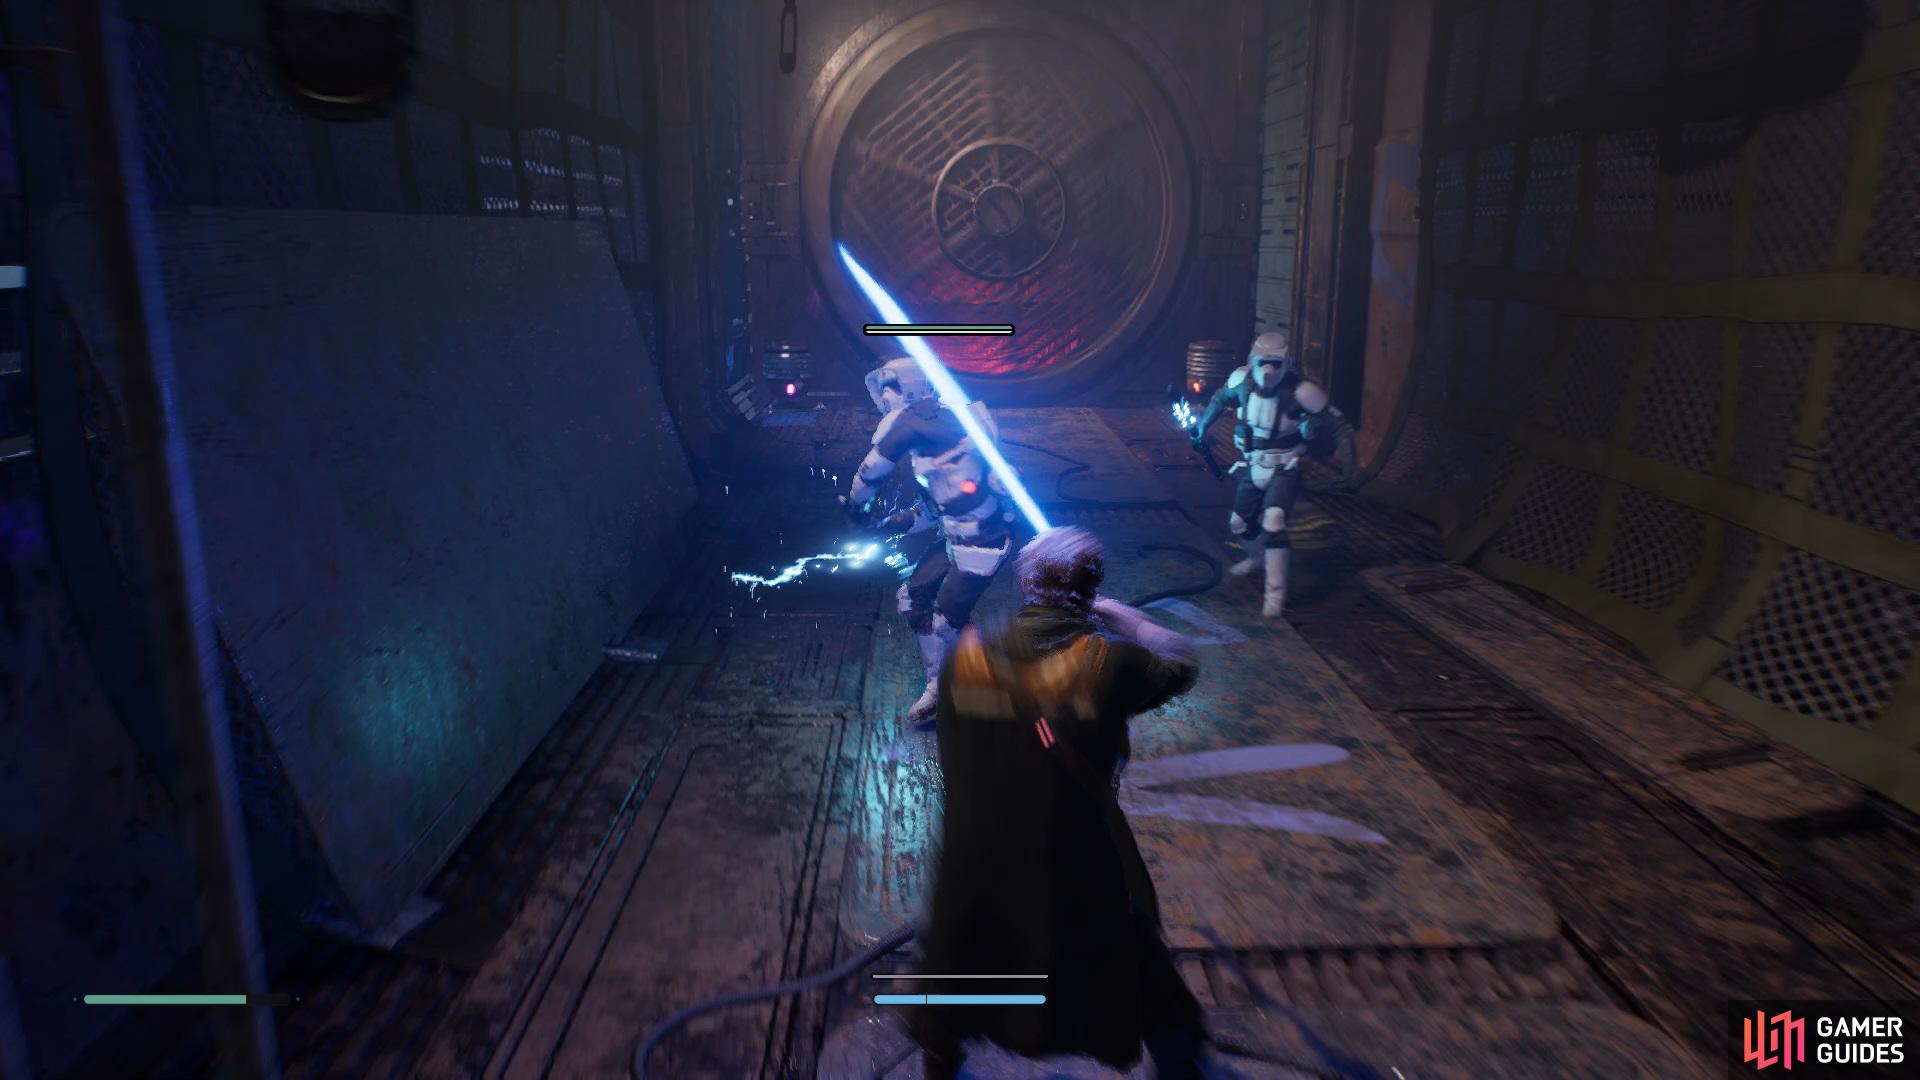 take out the Stormtroopers by parrying their attacks, 